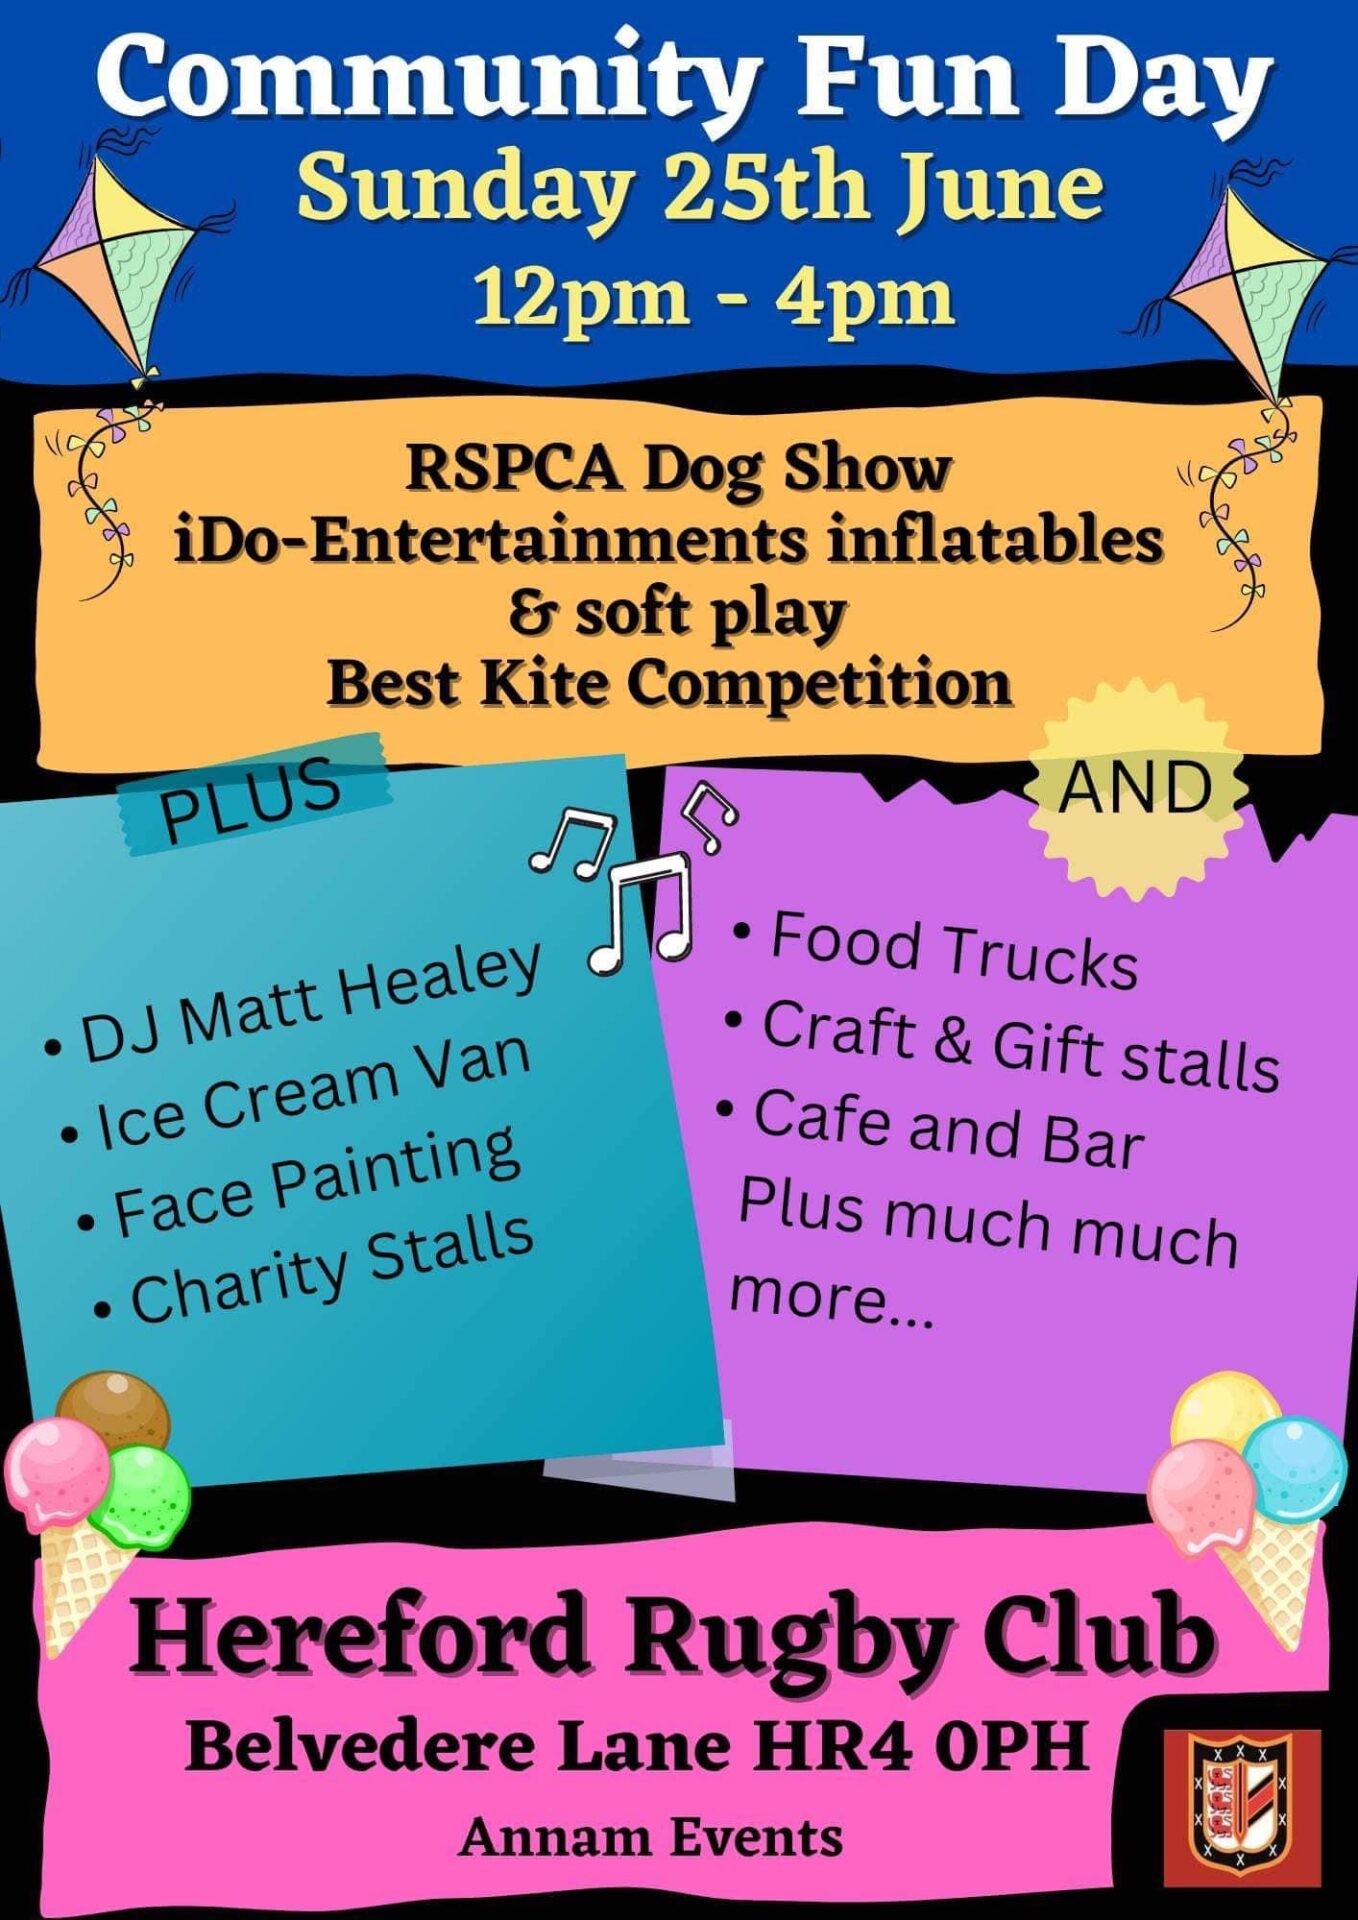 Community Fun Day at Hereford Rugby Club